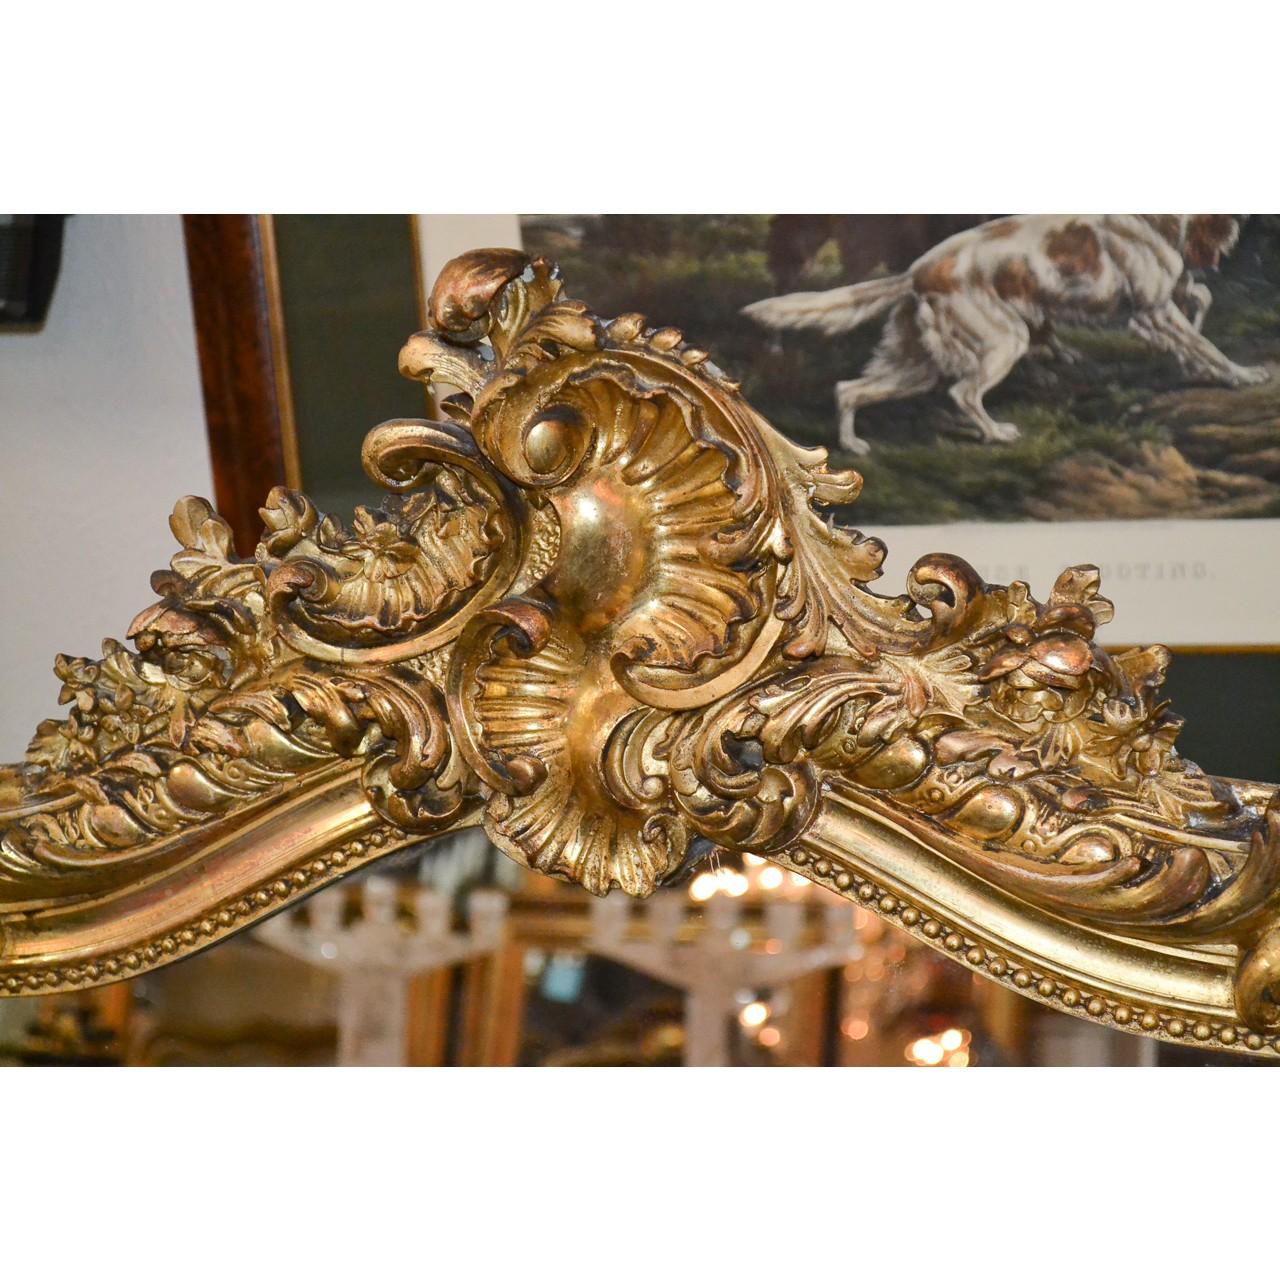 Fabulous 19th century French Louis XVI style carved giltwood wall or console mirror. The shaped crest adorned with carved shells, flower heads, and acanthus leaves. The relief carved frame and beaded inner border accented at the lower corners with